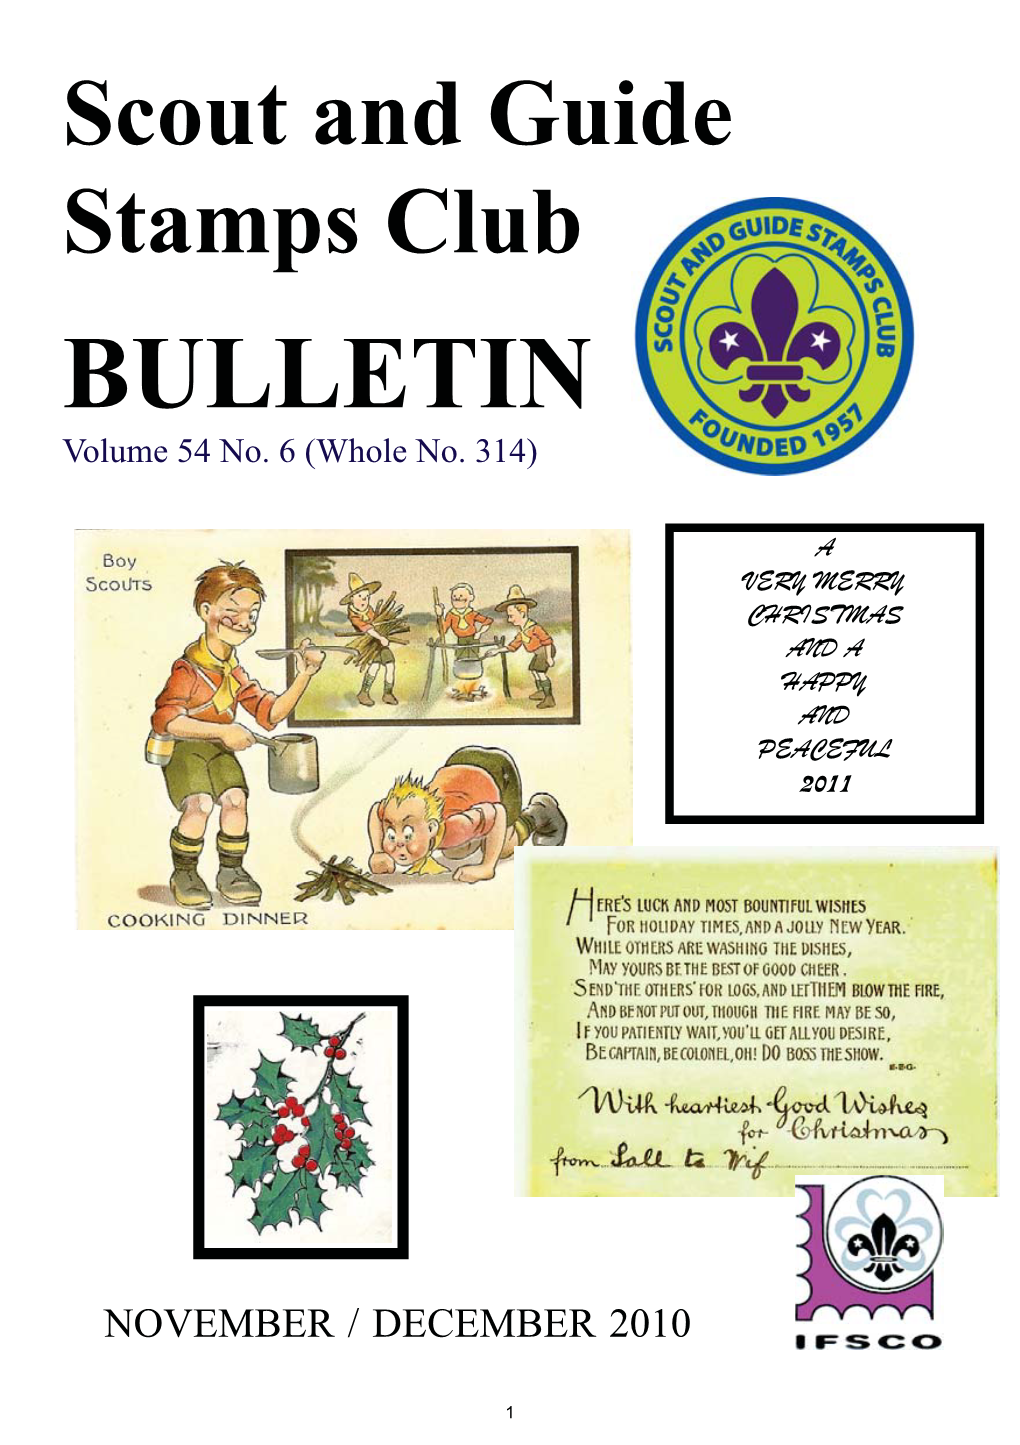 Scout and Guide Stamps Club BULLETIN #314